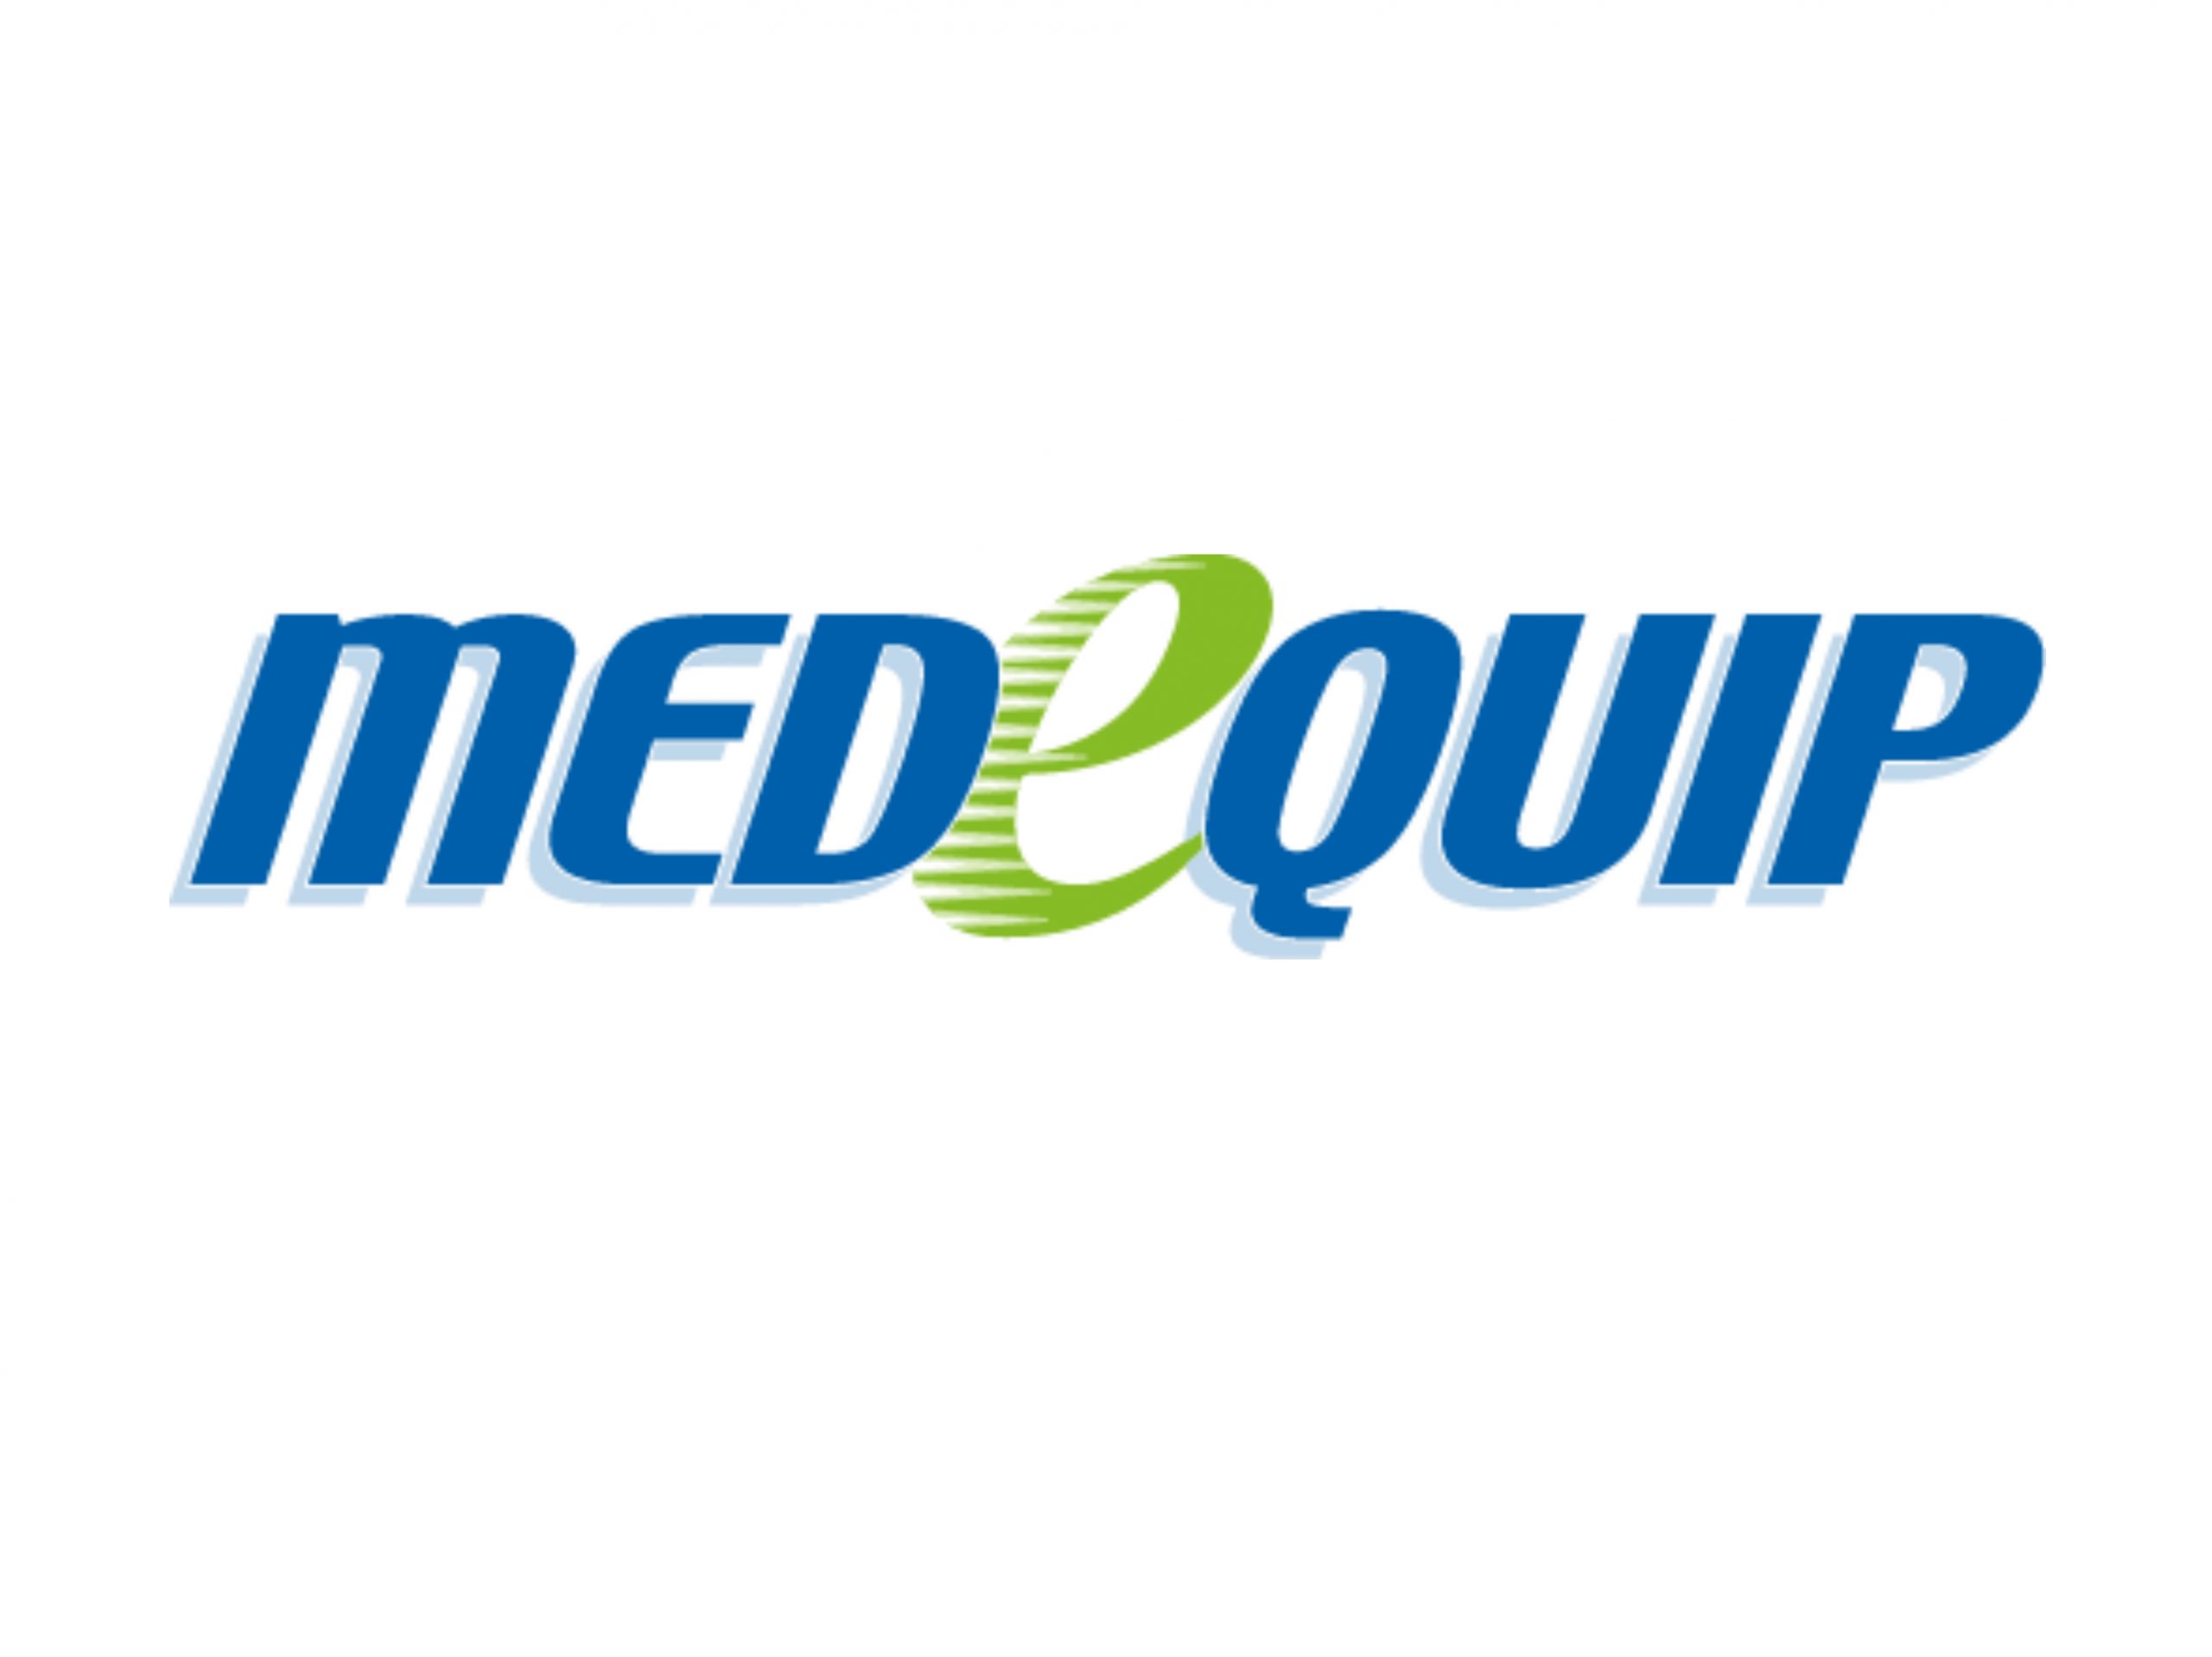 Medequip joins forces with Dutch medical equipment group, Medux